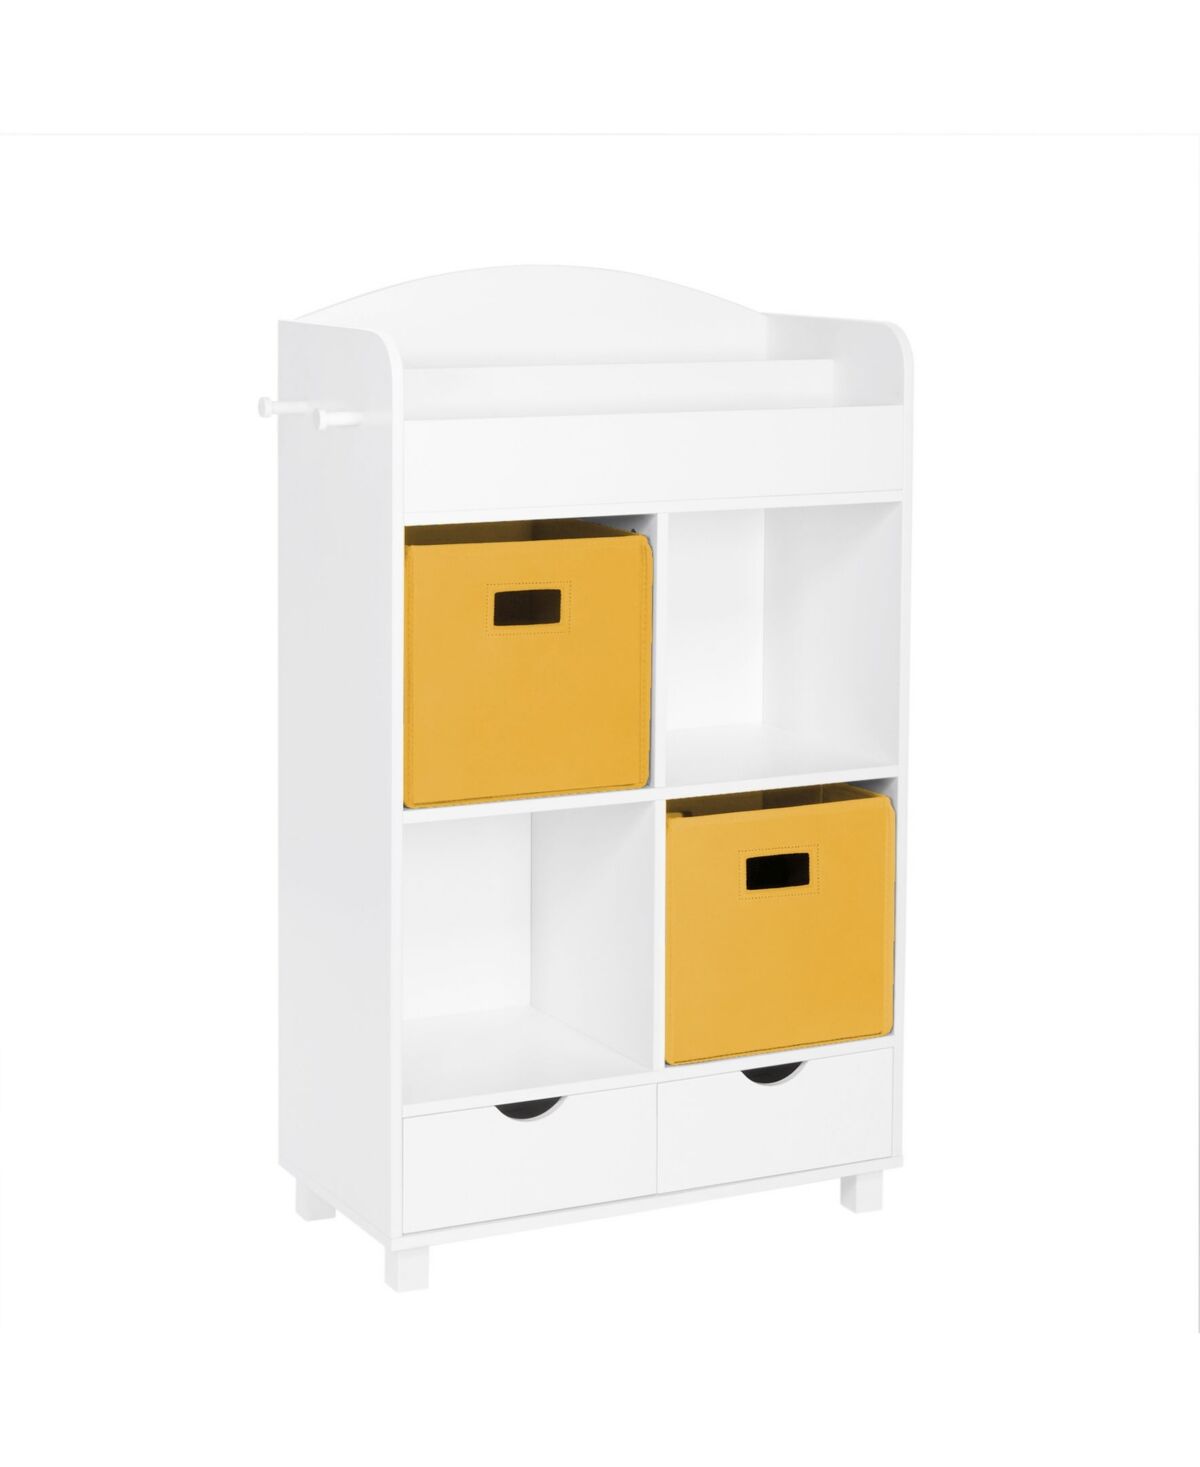 RiverRidge Home Book Nook Collection Kids Cubby Storage Cabinet with Bookrack - Golden Yellow